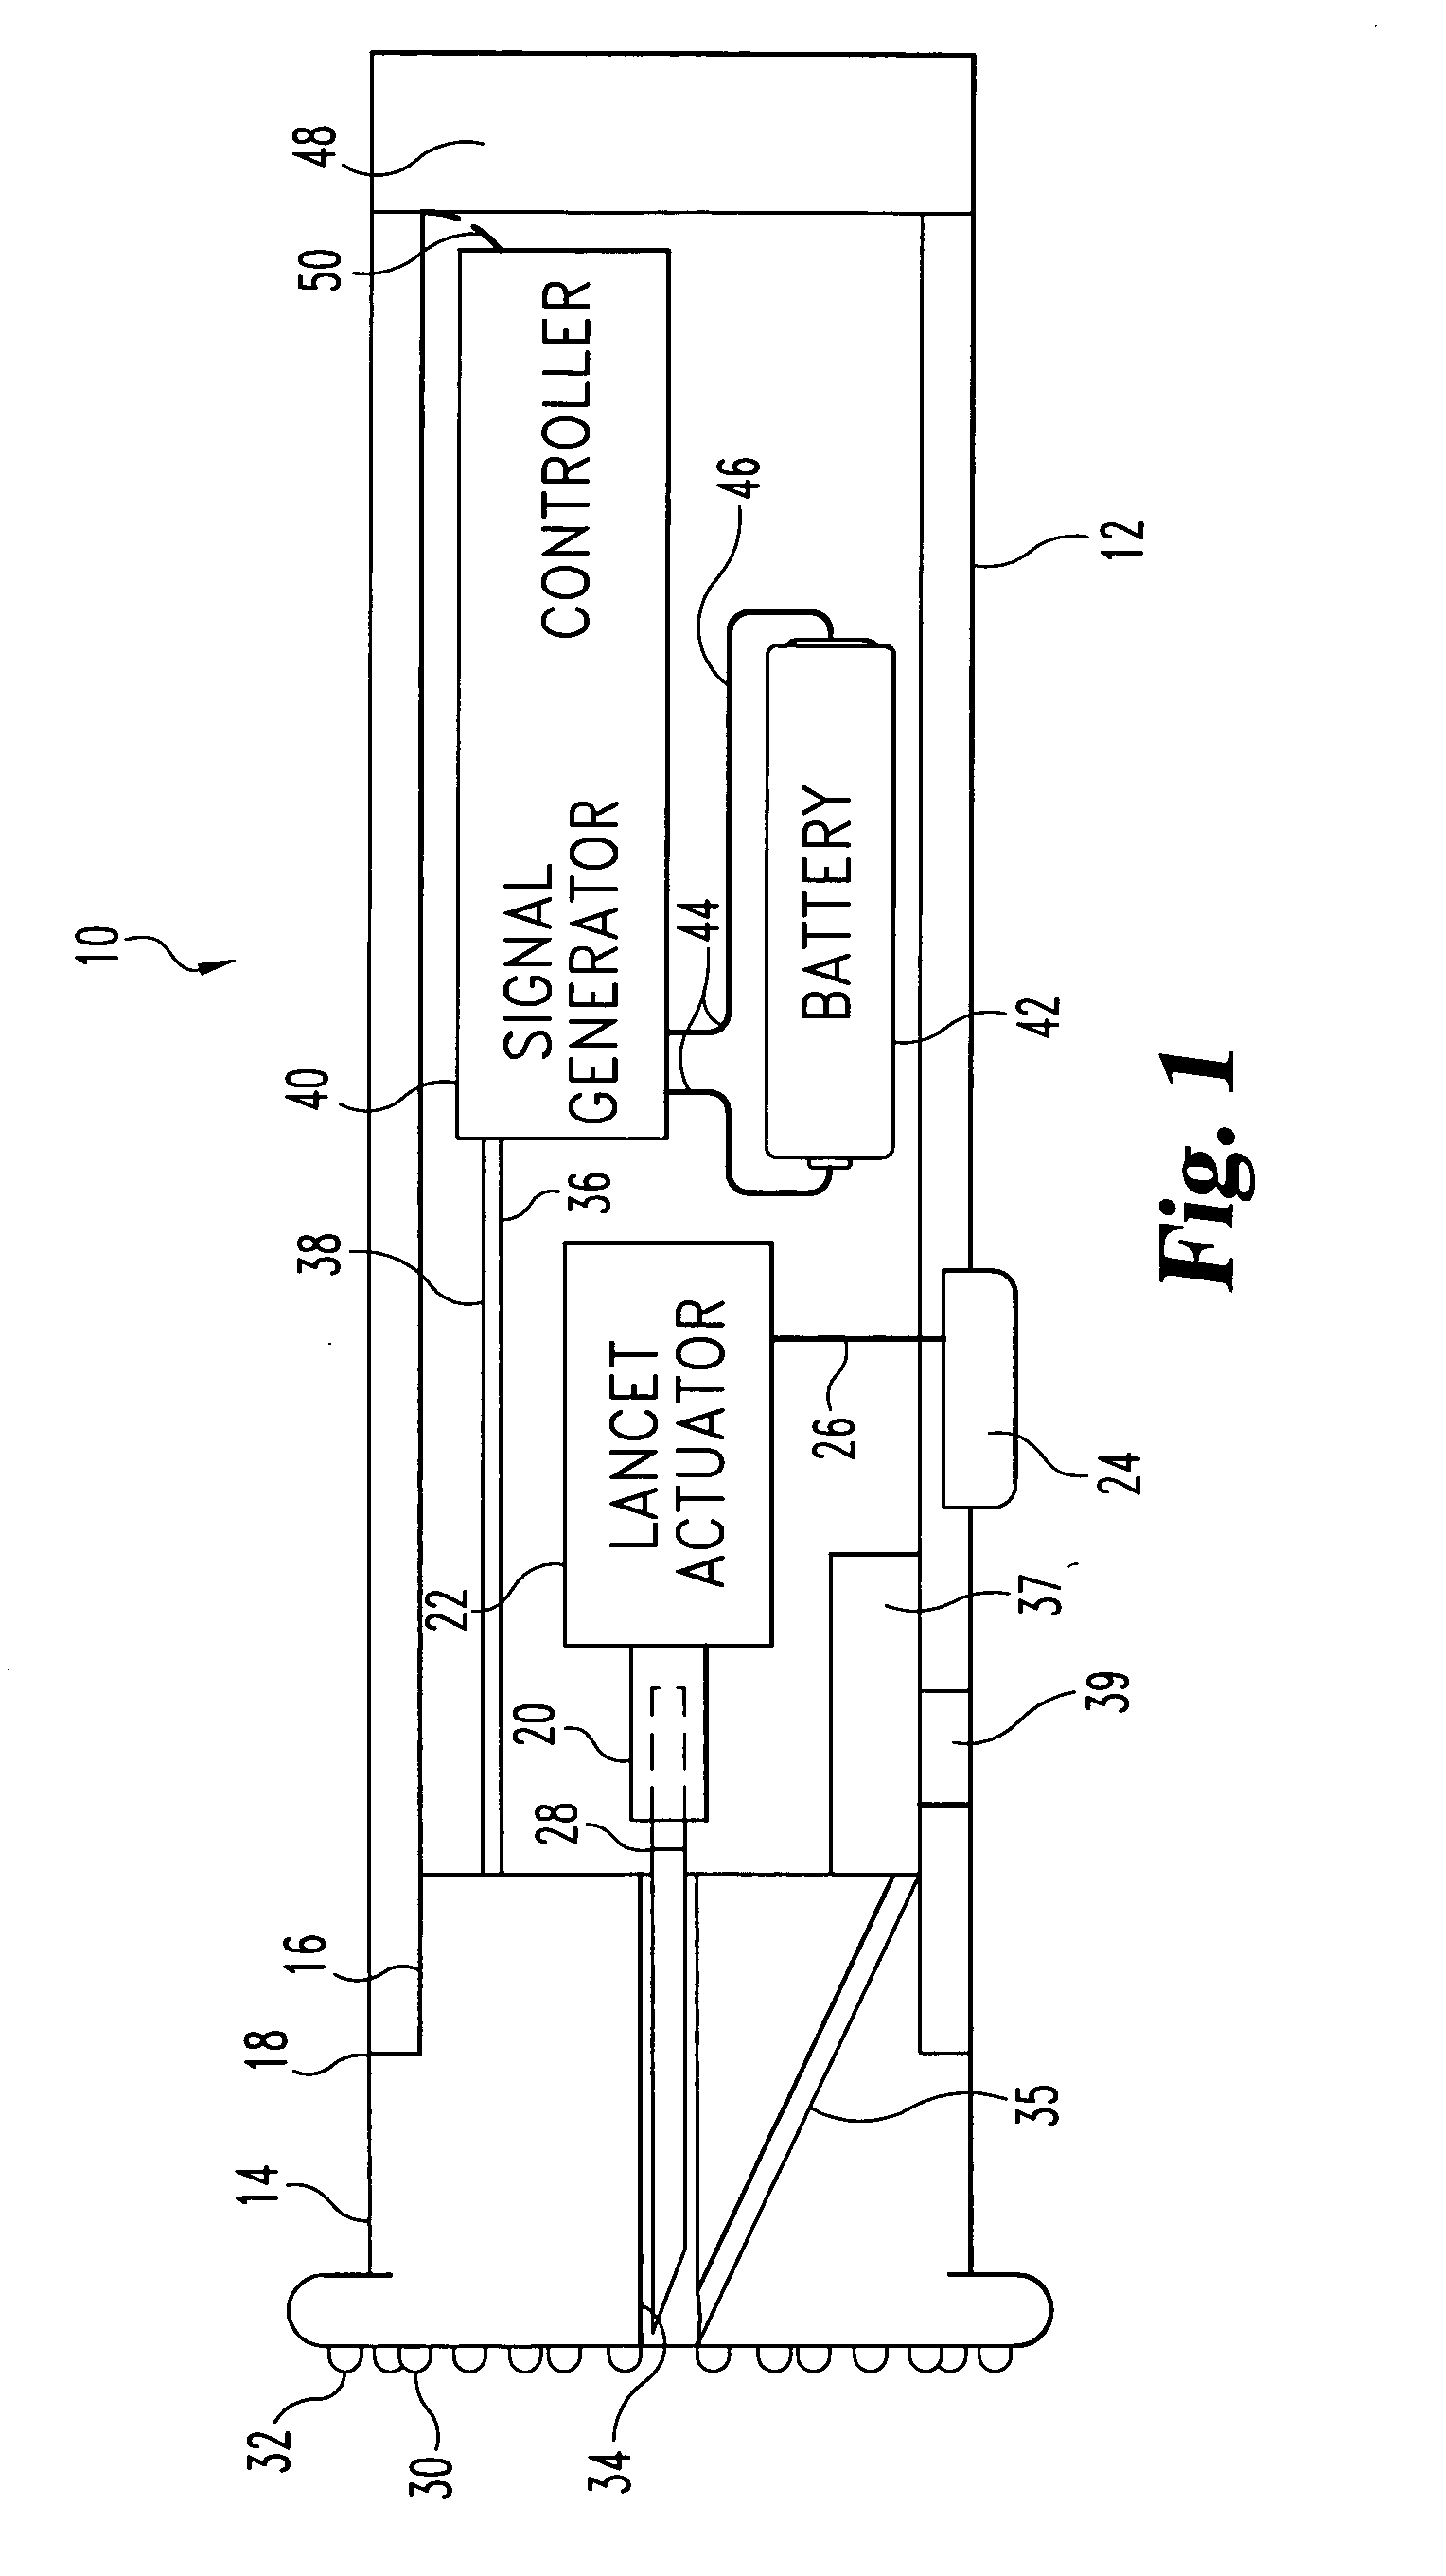 Method and apparatus for electrical stimulation to enhance lancing device performance